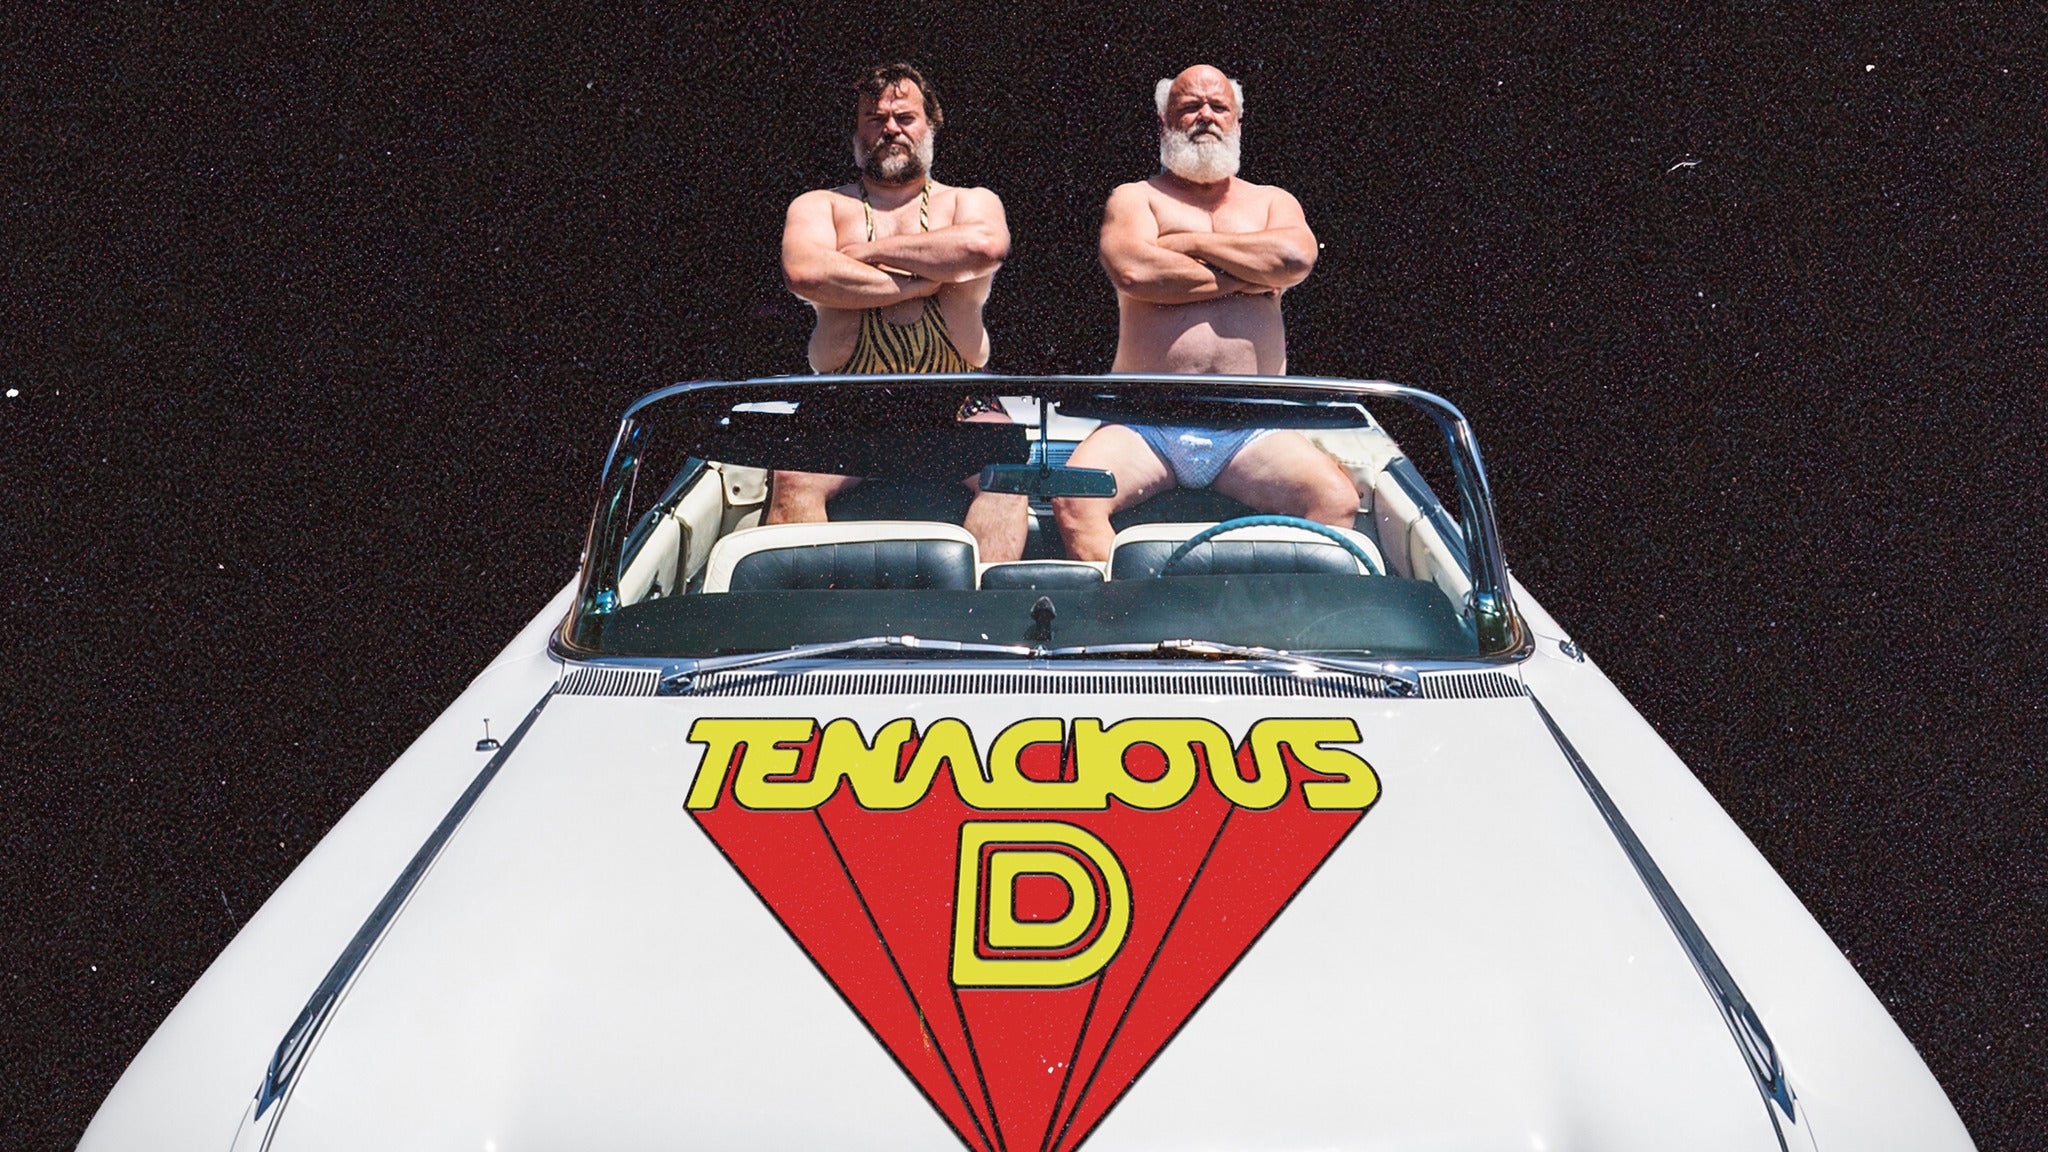 Tenacious D 2022 Tour presale password for early tickets in Gilford